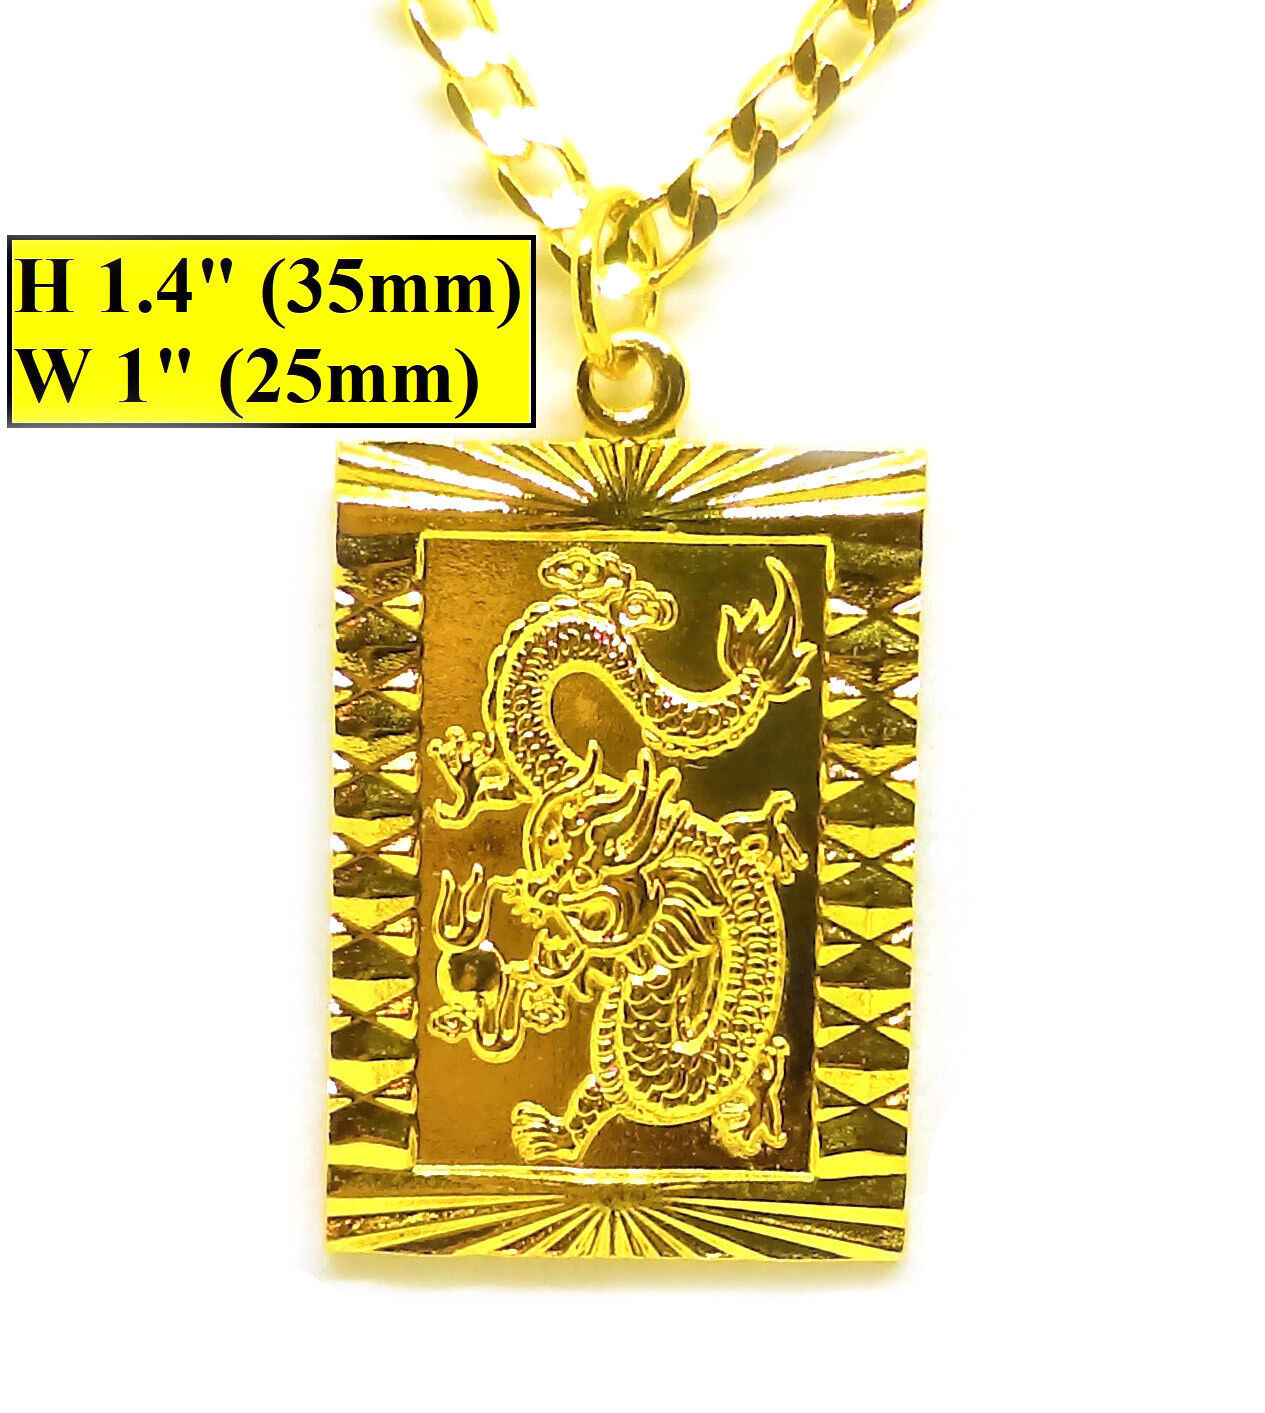 18k Yellow Gold 20" Curb Link Chain Necklace And Dragon Pendant w GiftPkg D451C